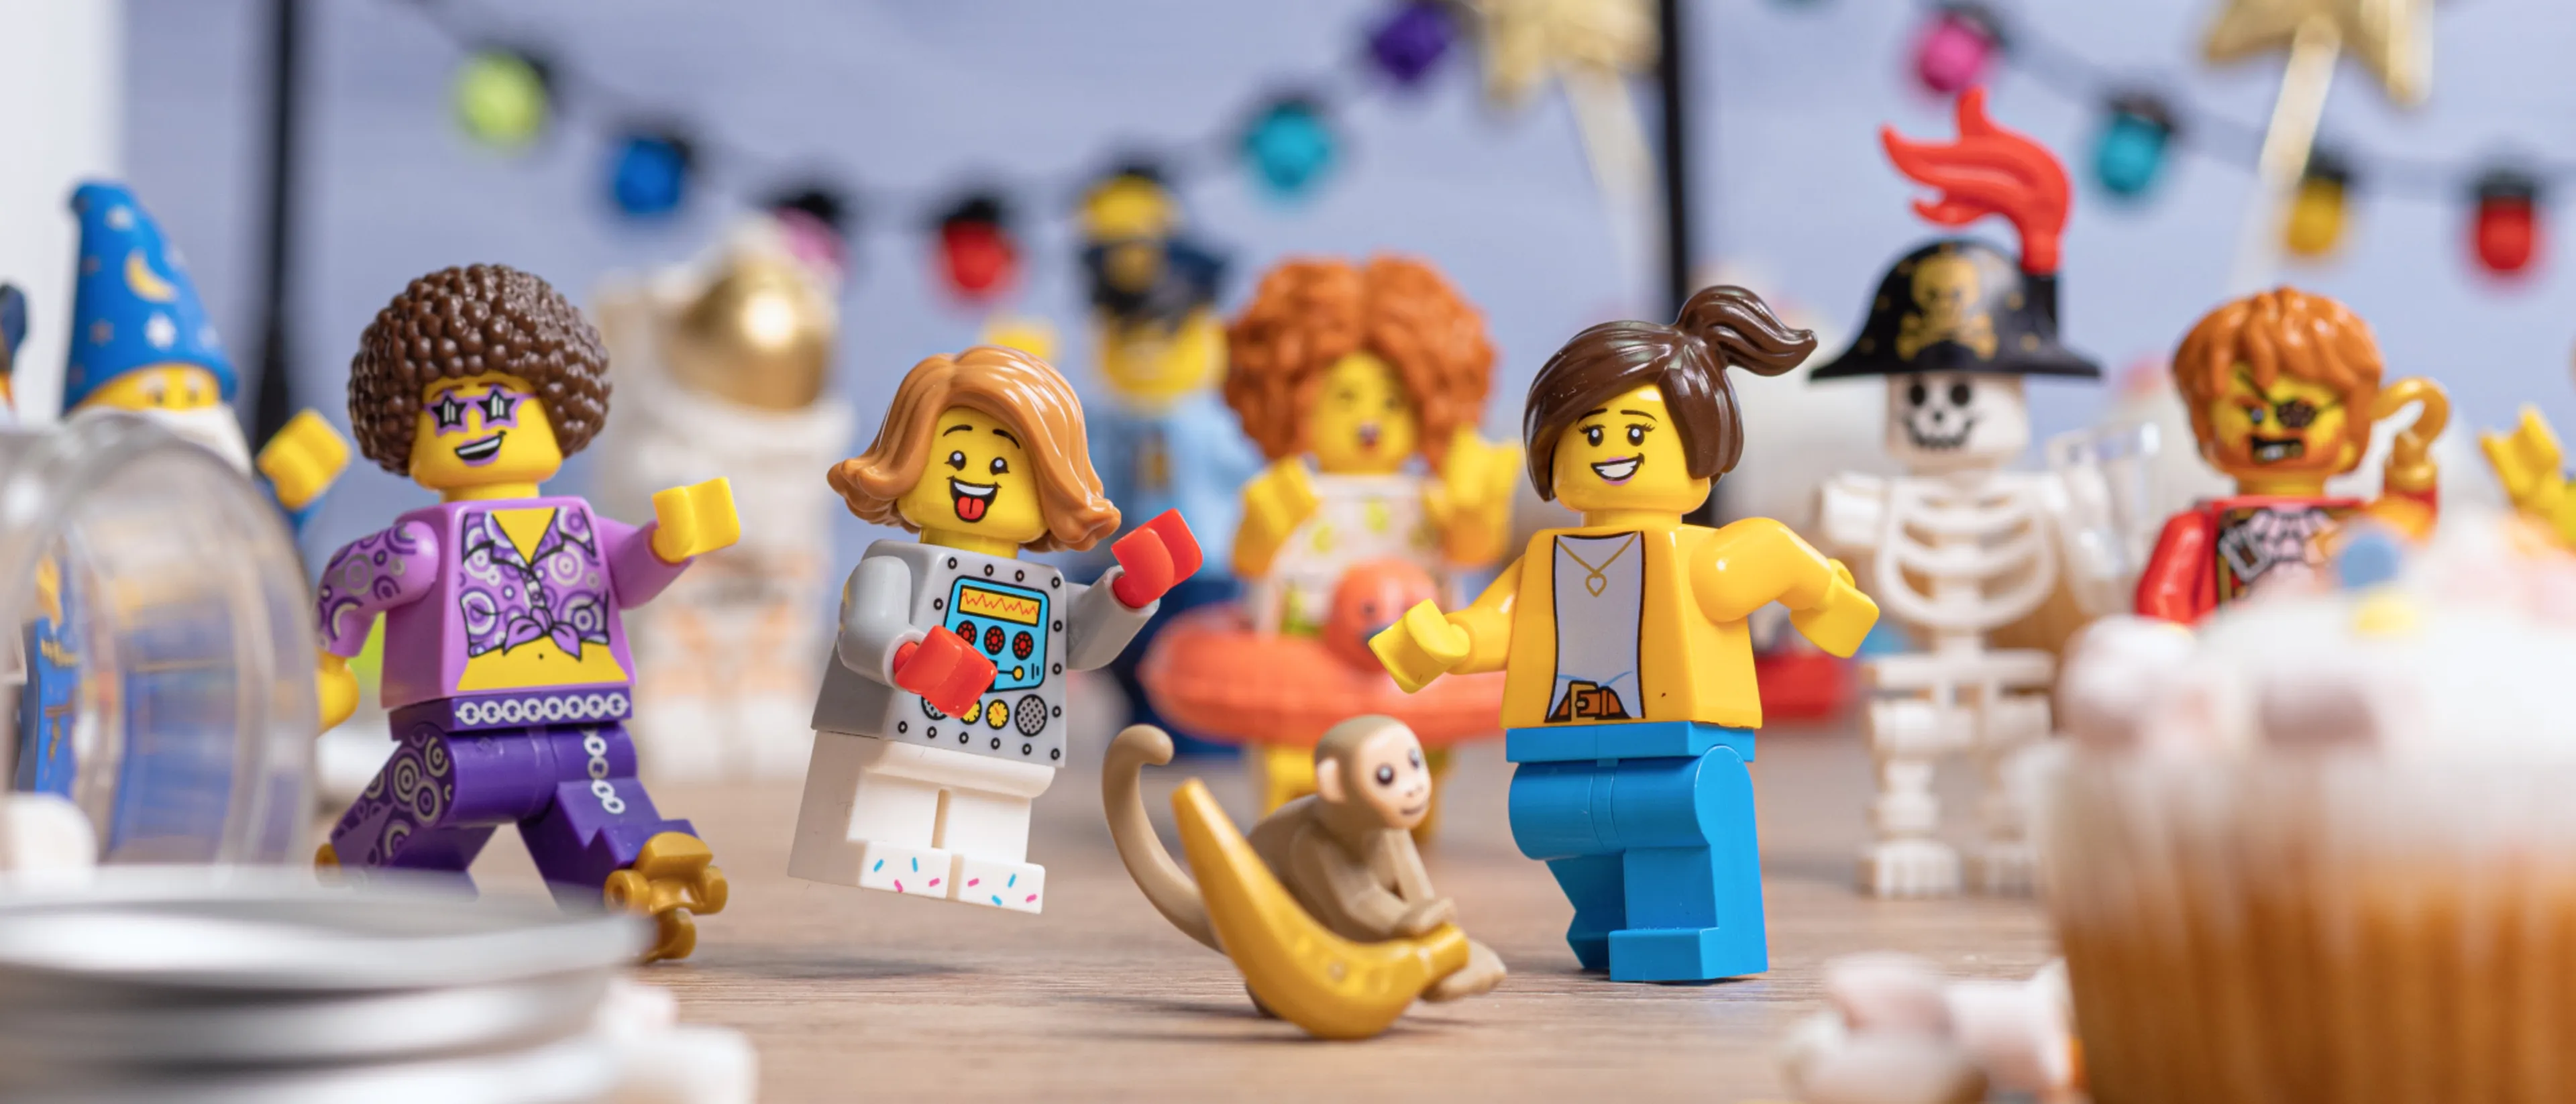 A minifigure birthday party